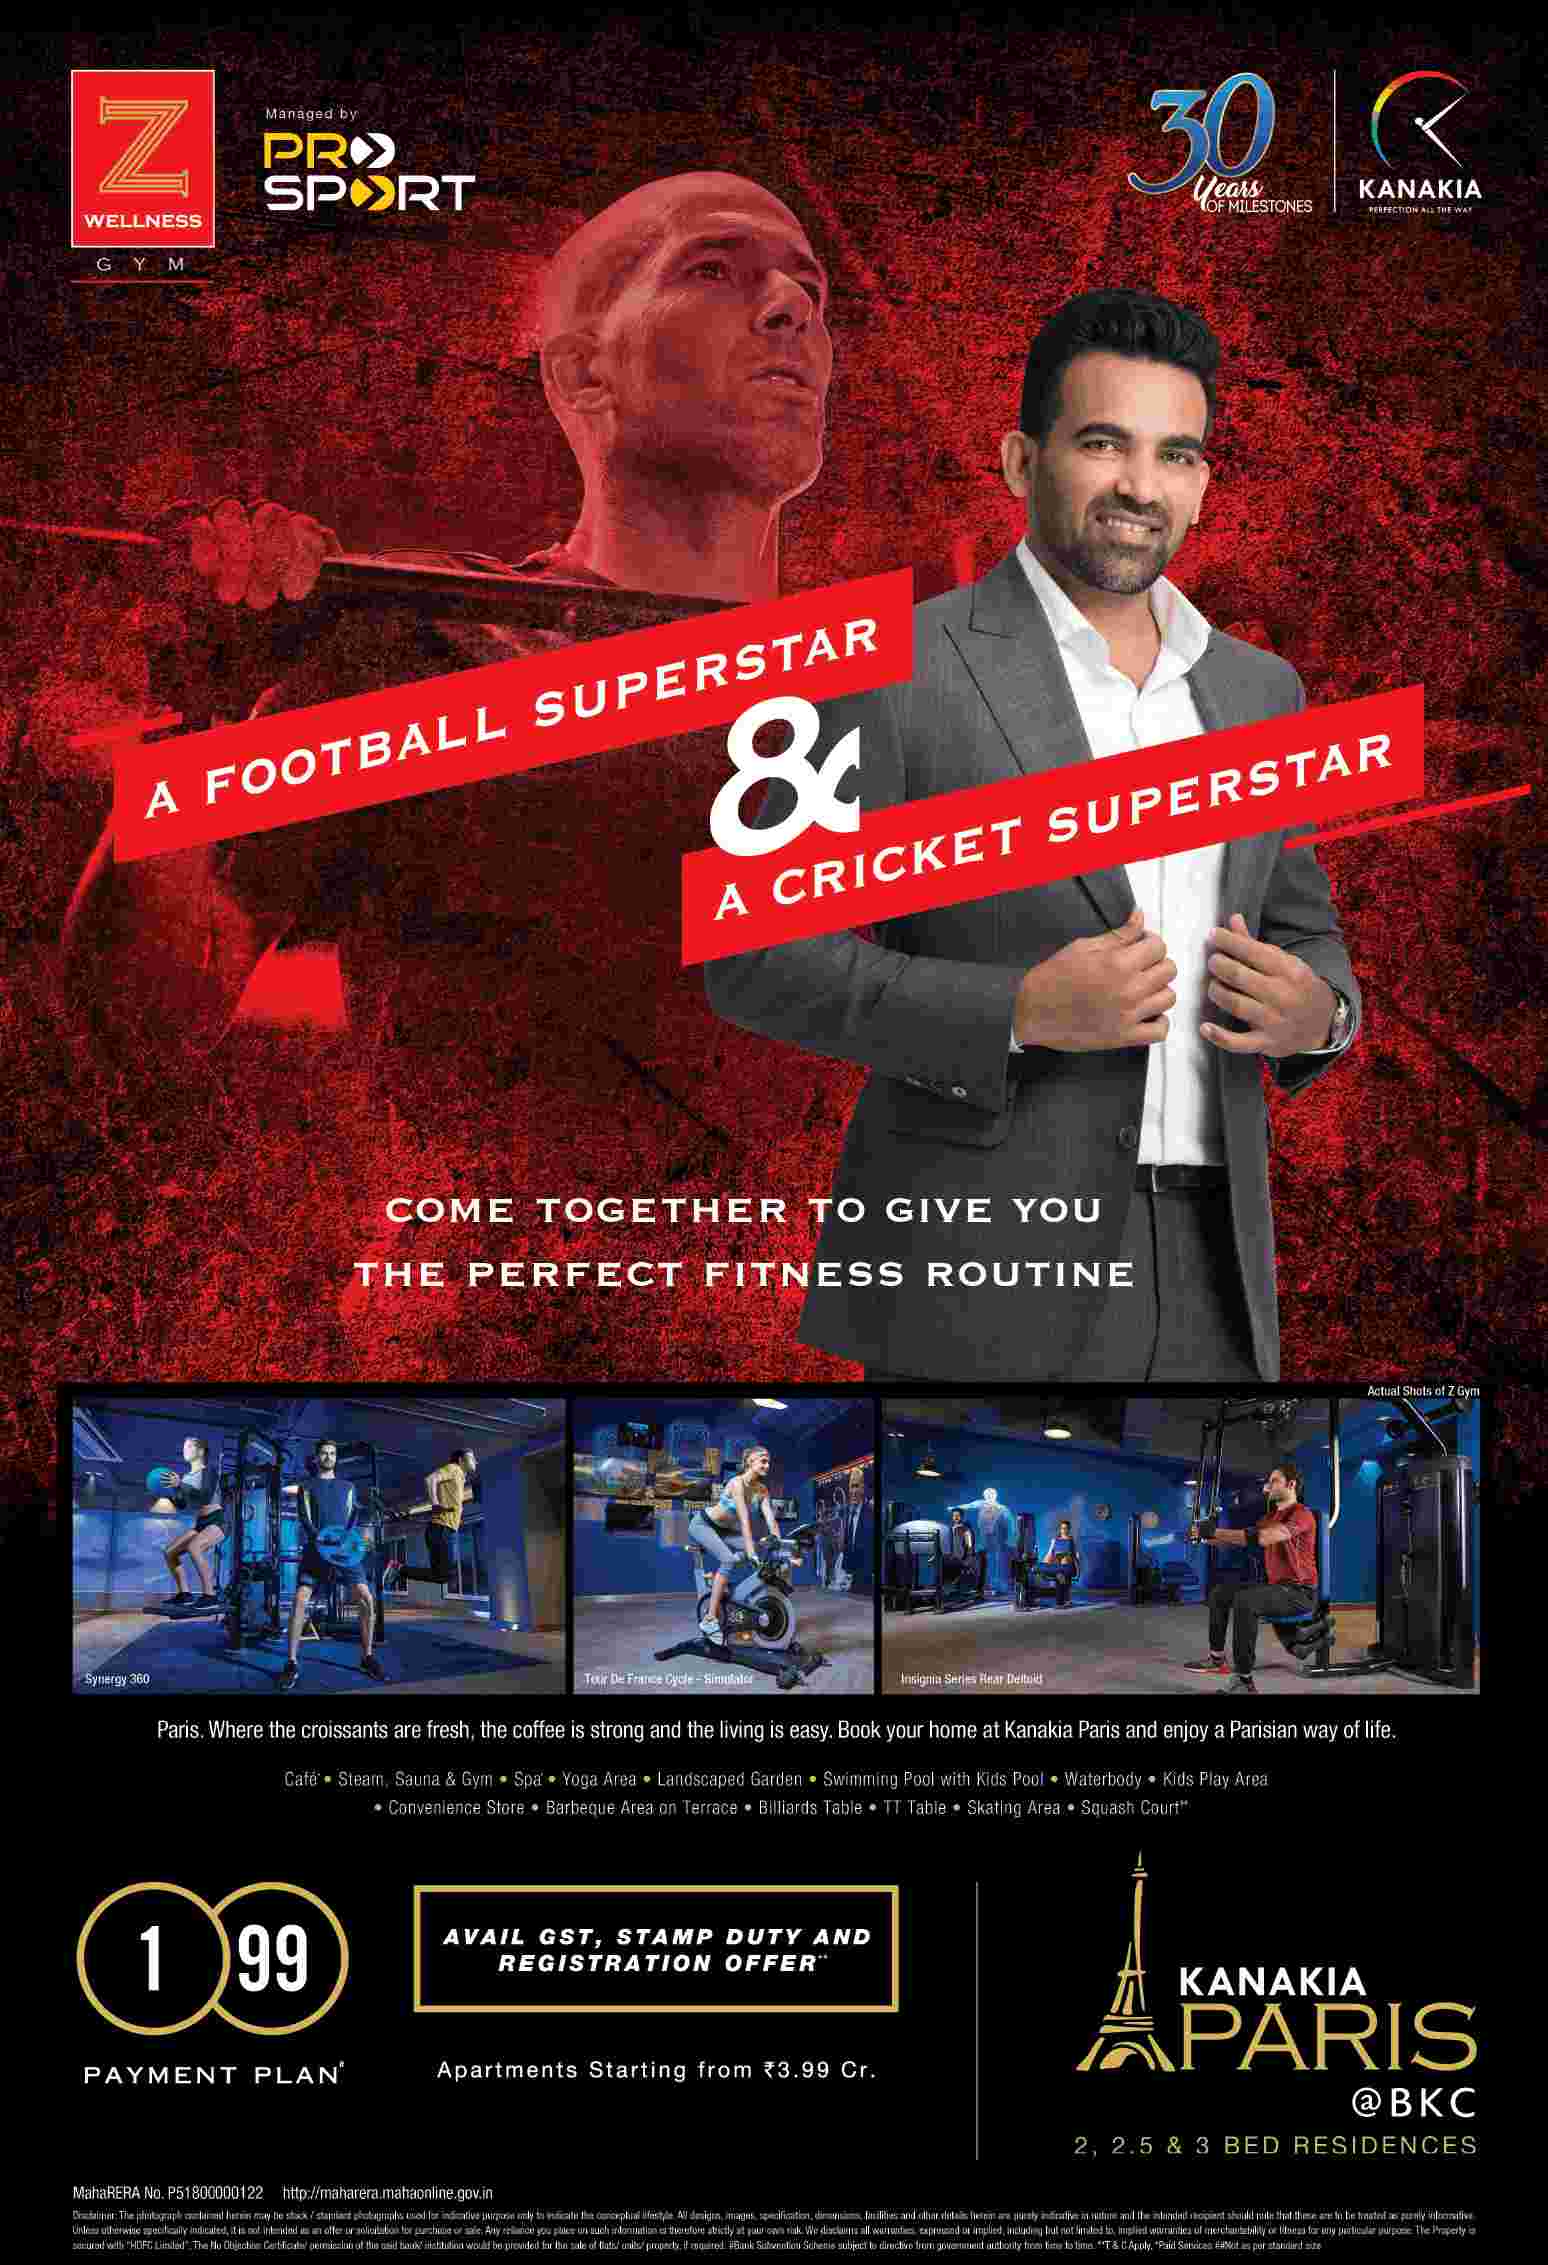 Get the perfect fitness routine by a football & cricket superstar at Kanakia Paris in Mumbai Update